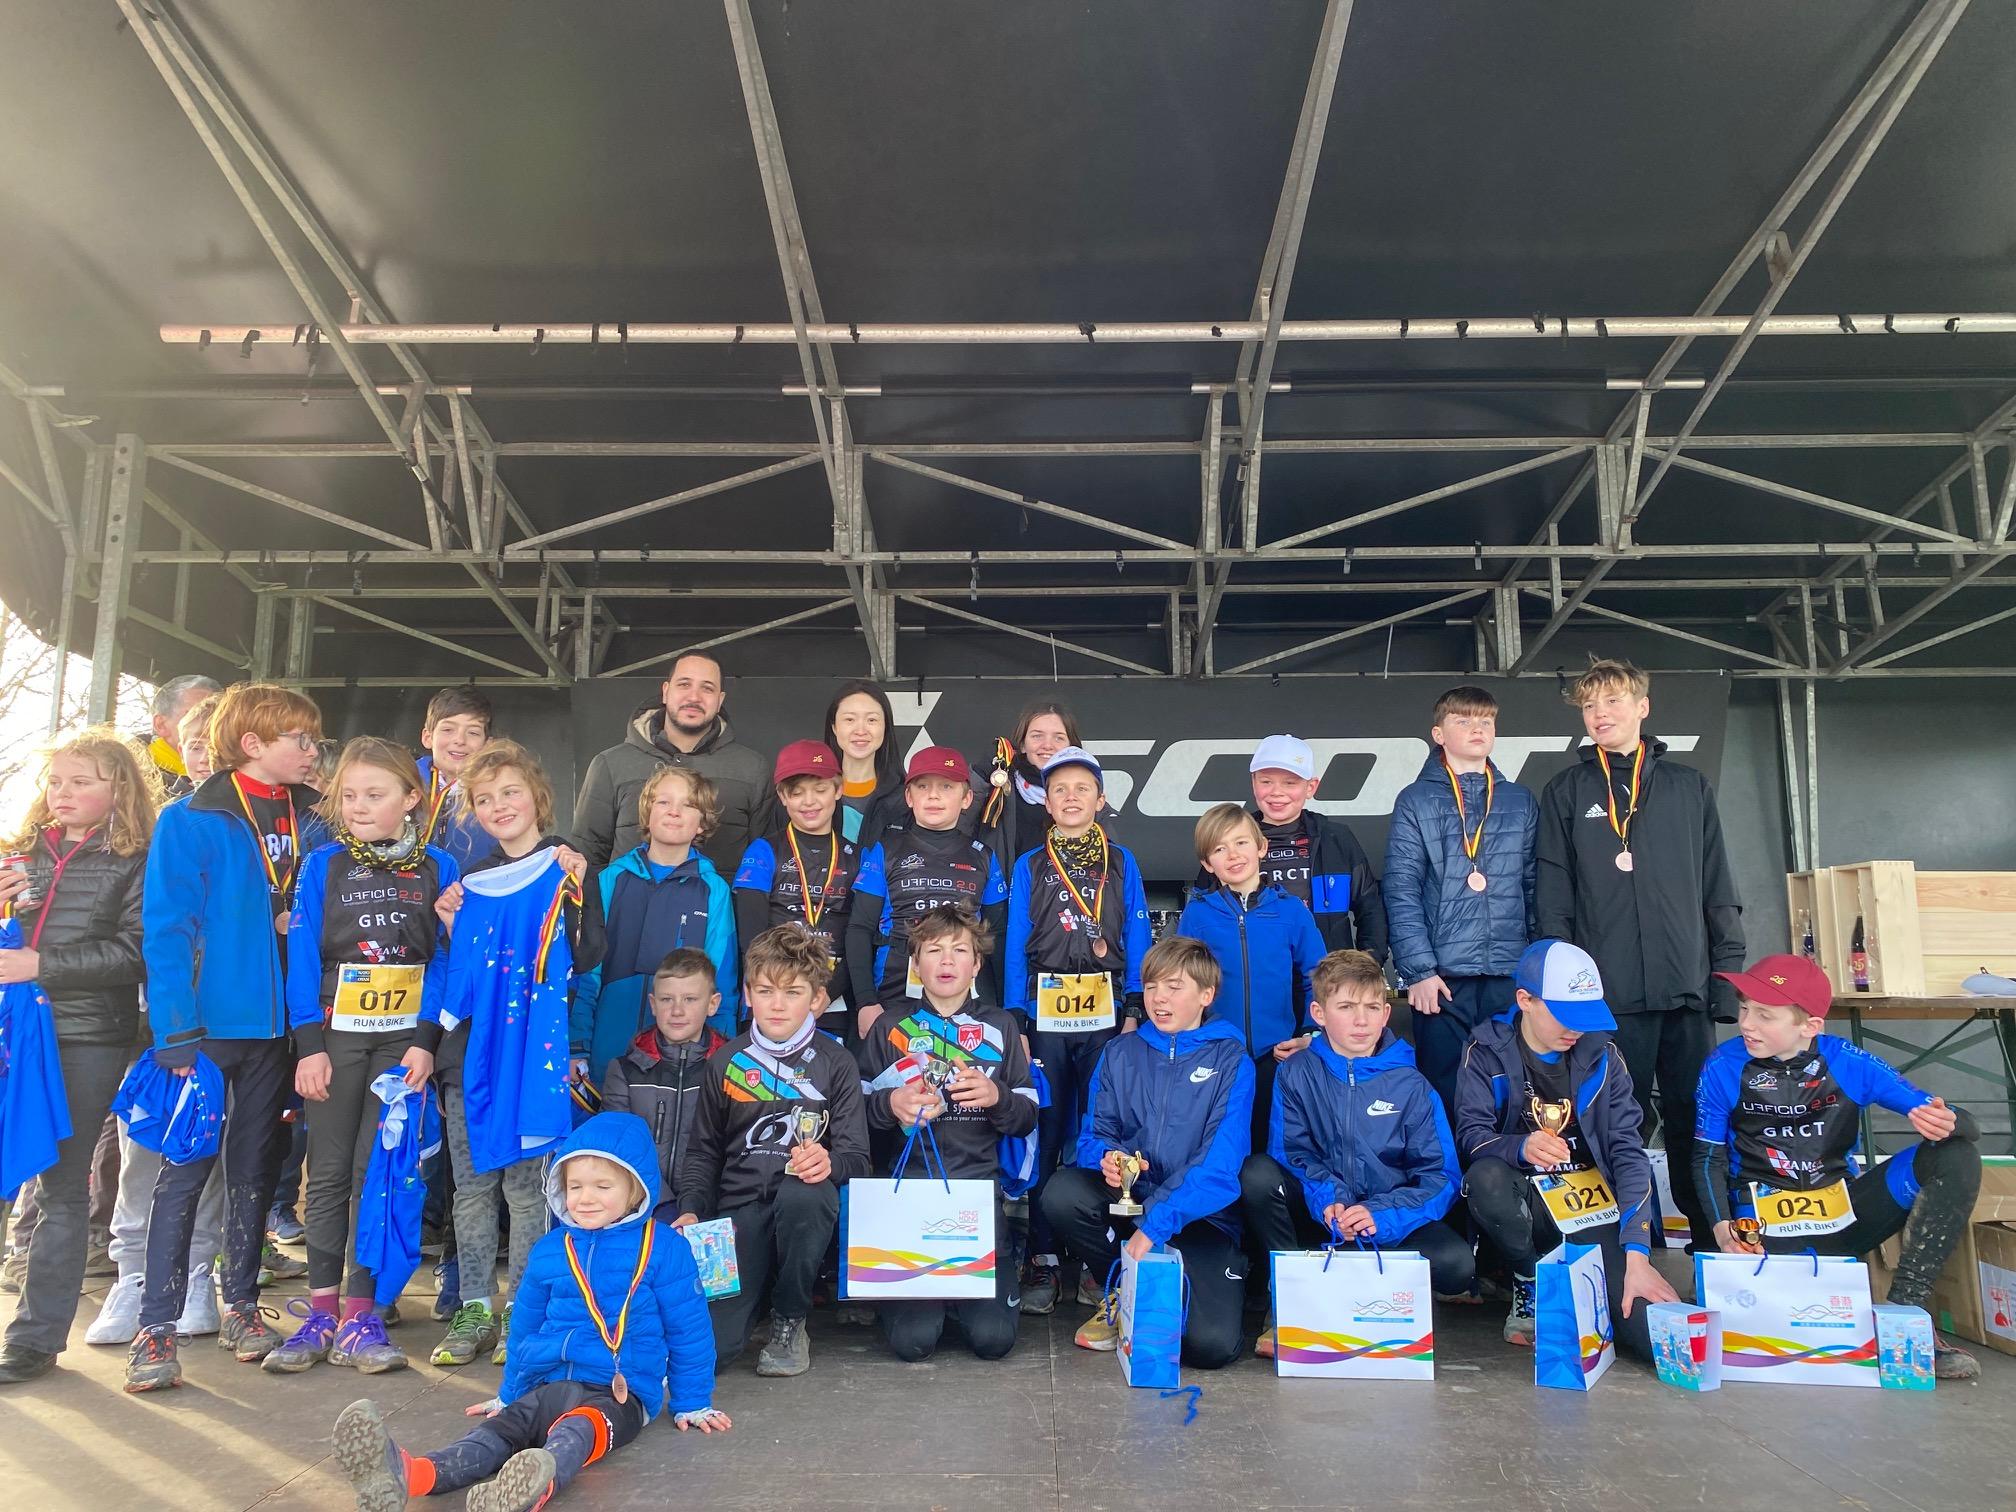 Assistant Representative of the Hong Kong Economic and Trade Office in Brussels, Miss Annie Loong (last row, second right) gave out Hong Kong souvenirs at the prize award ceremony of the 2023 Run & Bike event held in Vilvoorde, Belgium on January 7 (Brussels time).